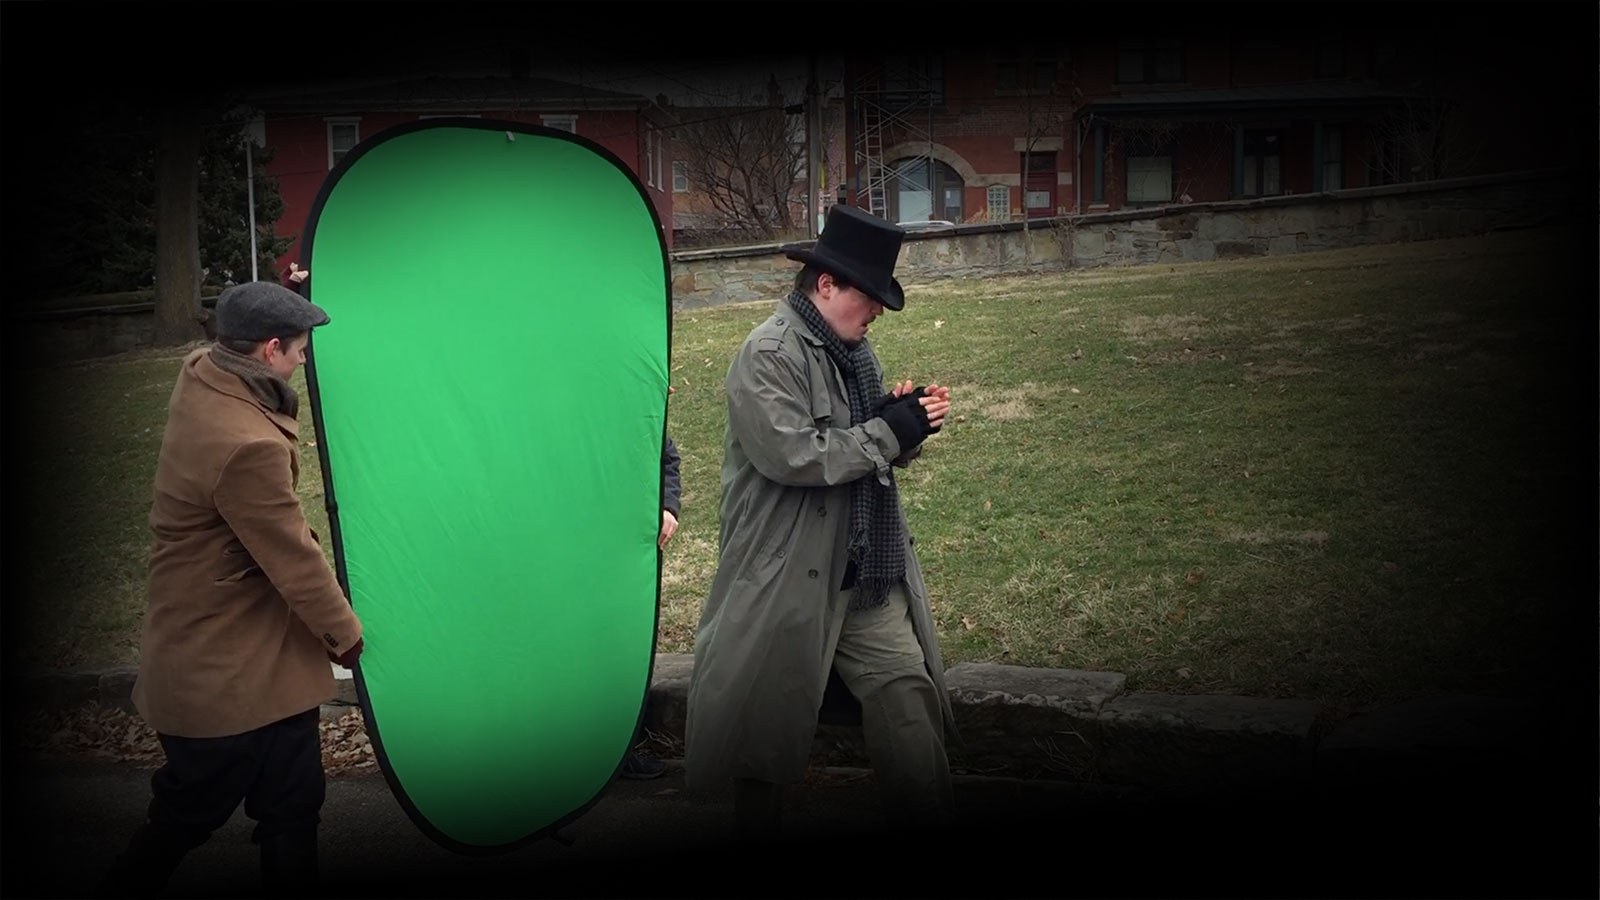 Background image an on-set greenscreen